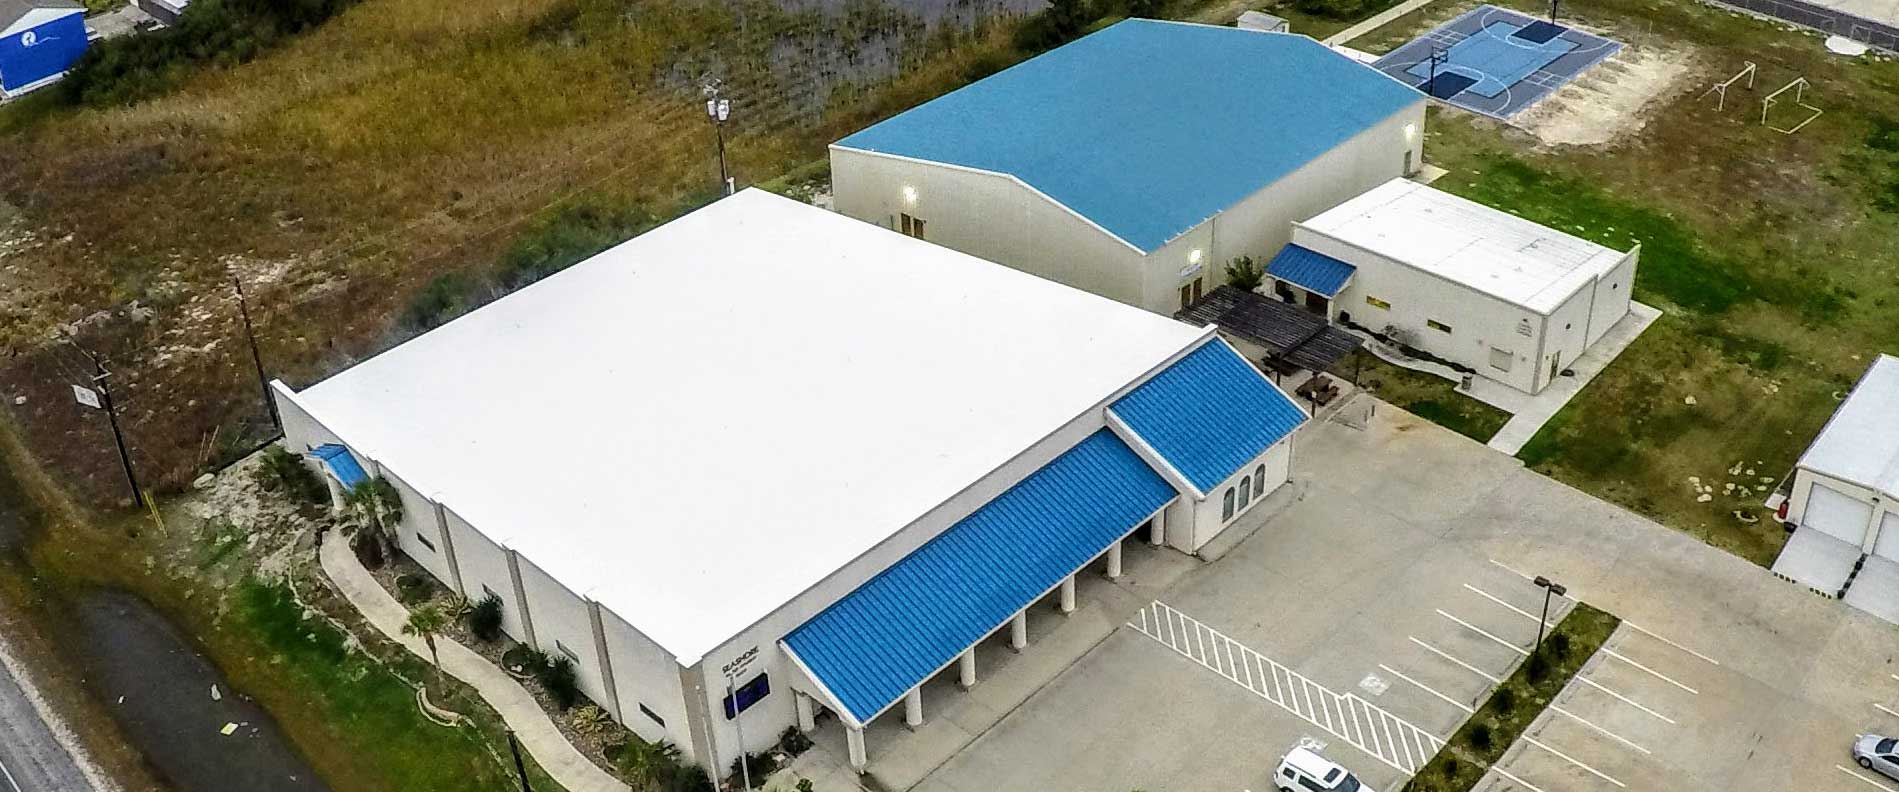 Commercial Roofing Systems JGA Texas